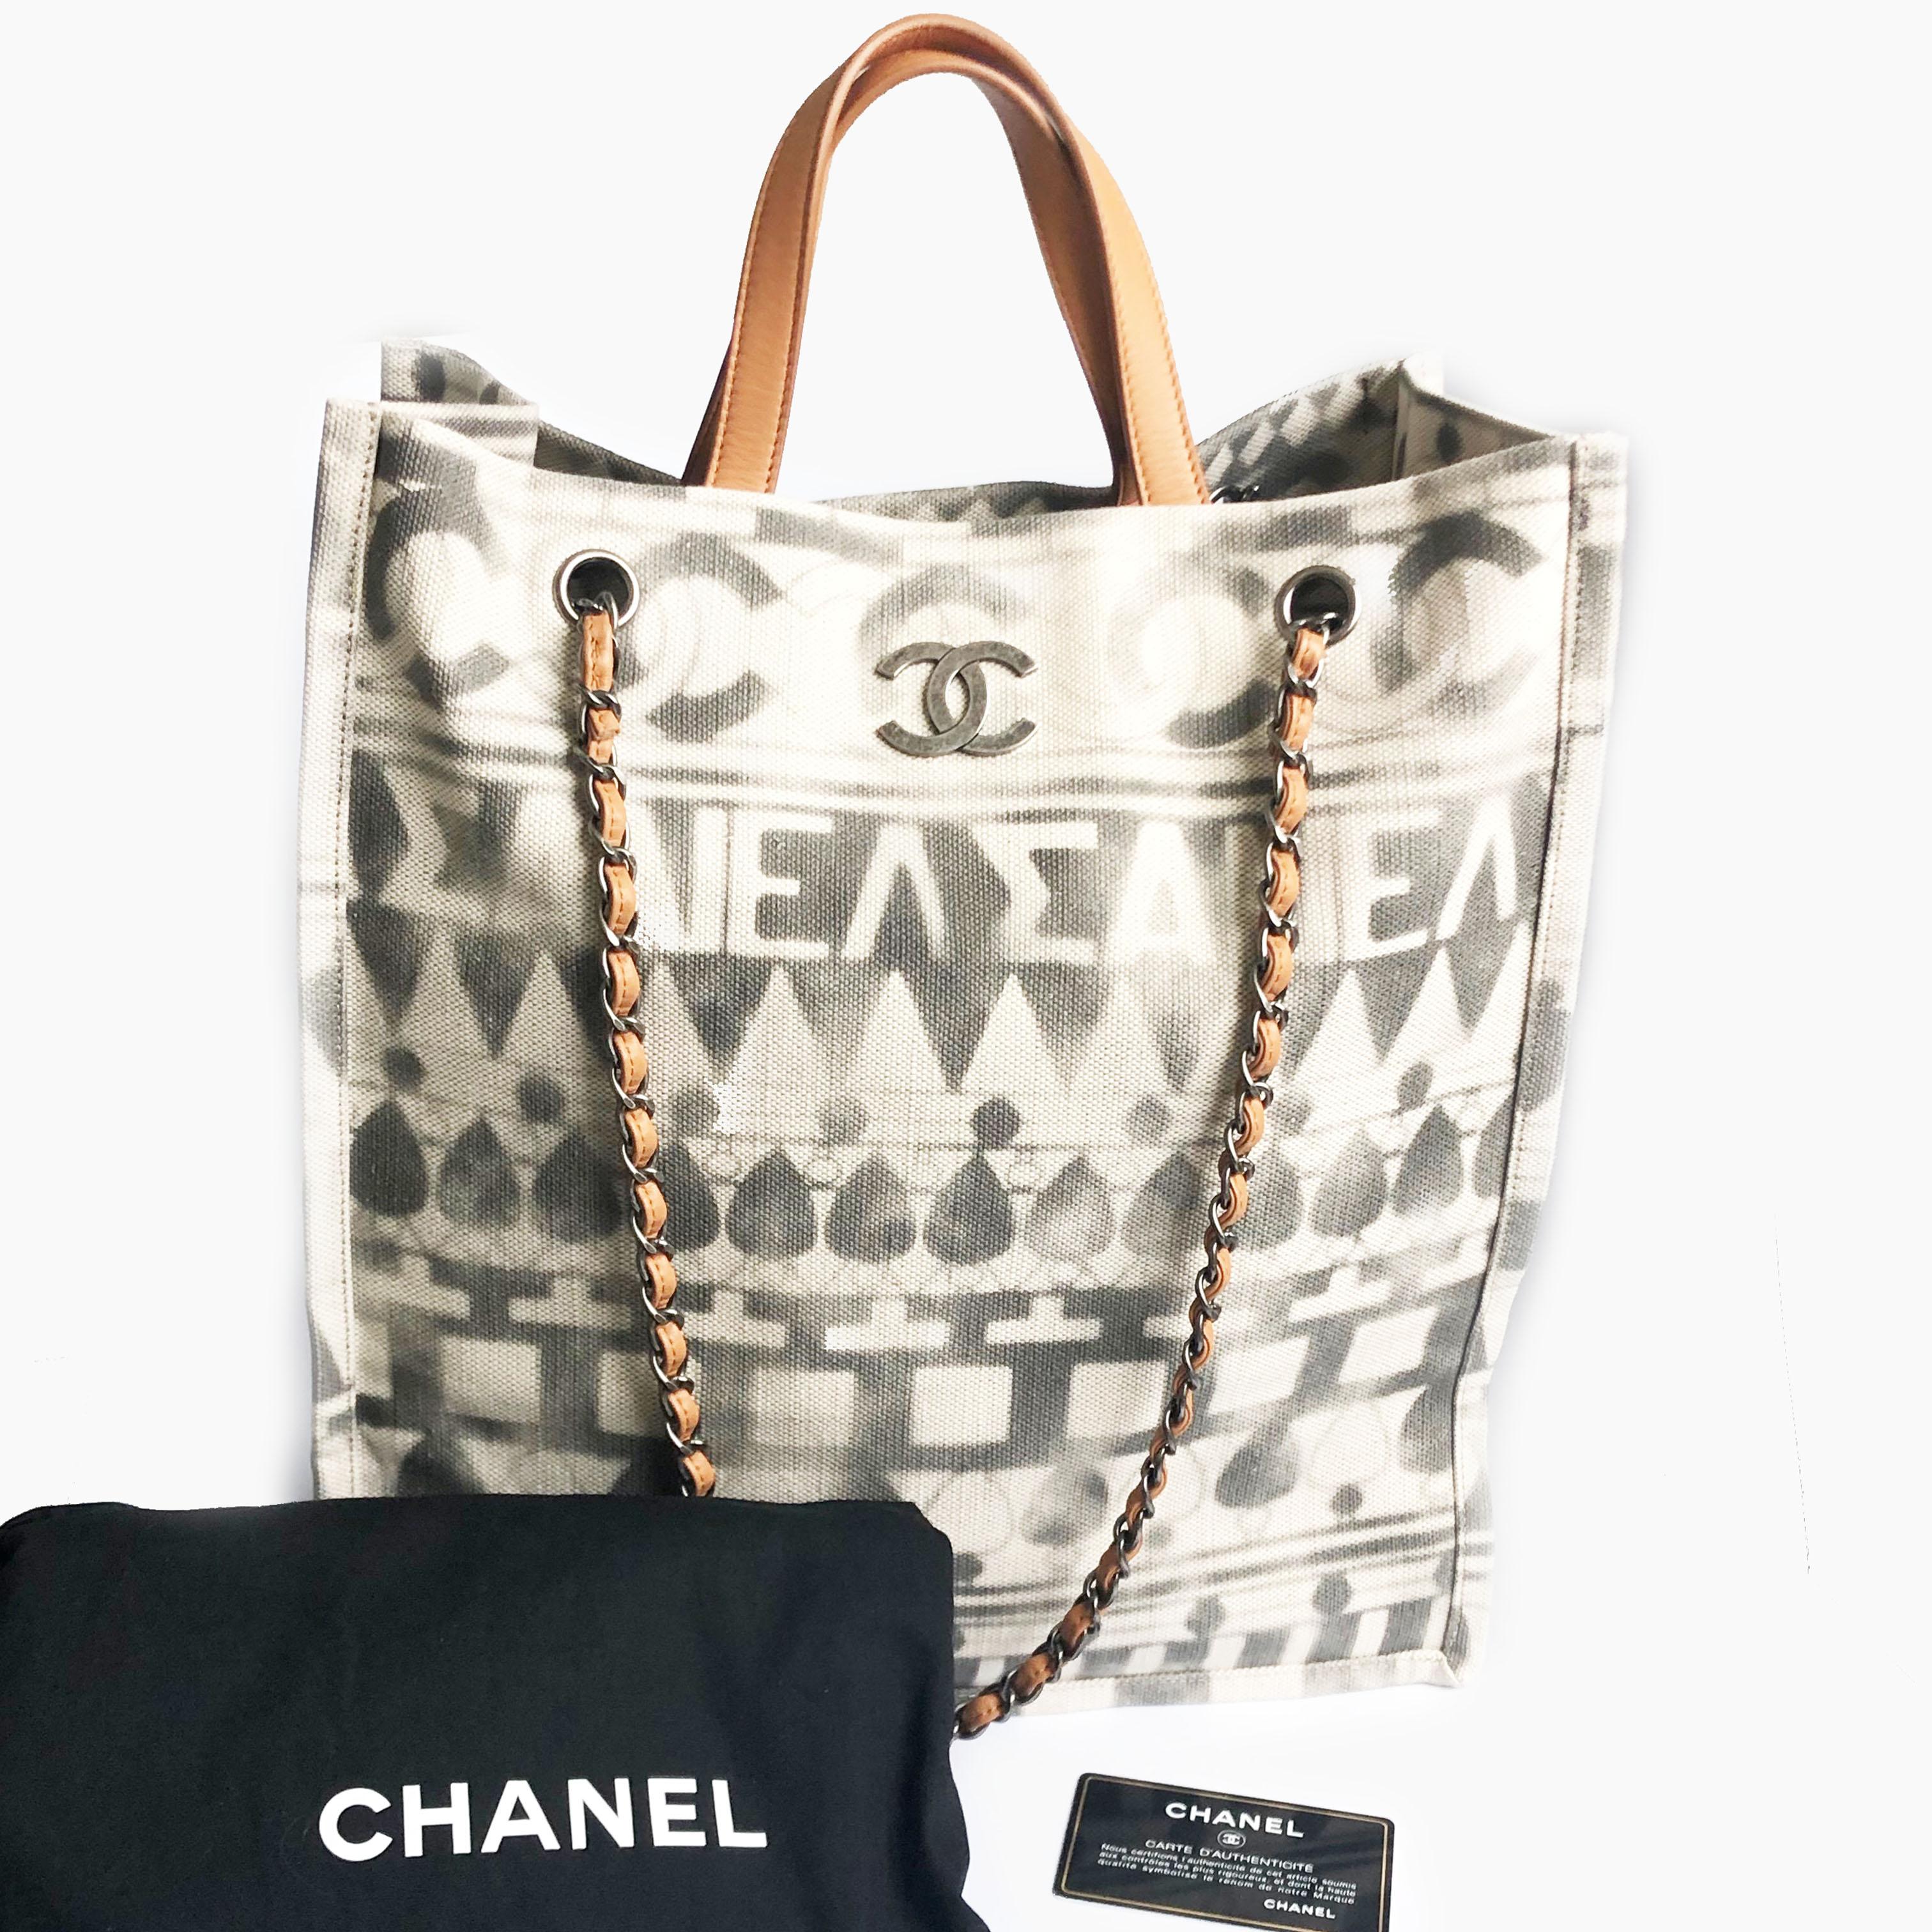 Authentic, preowned Chanel Iliad Large Tote Bag from the 2018 Cruise Collection, featuring Greece antiquities and modernity.  Made from canvas with leather top handles and removable chain & leather shoulder straps.  Lined in beige canvas with one